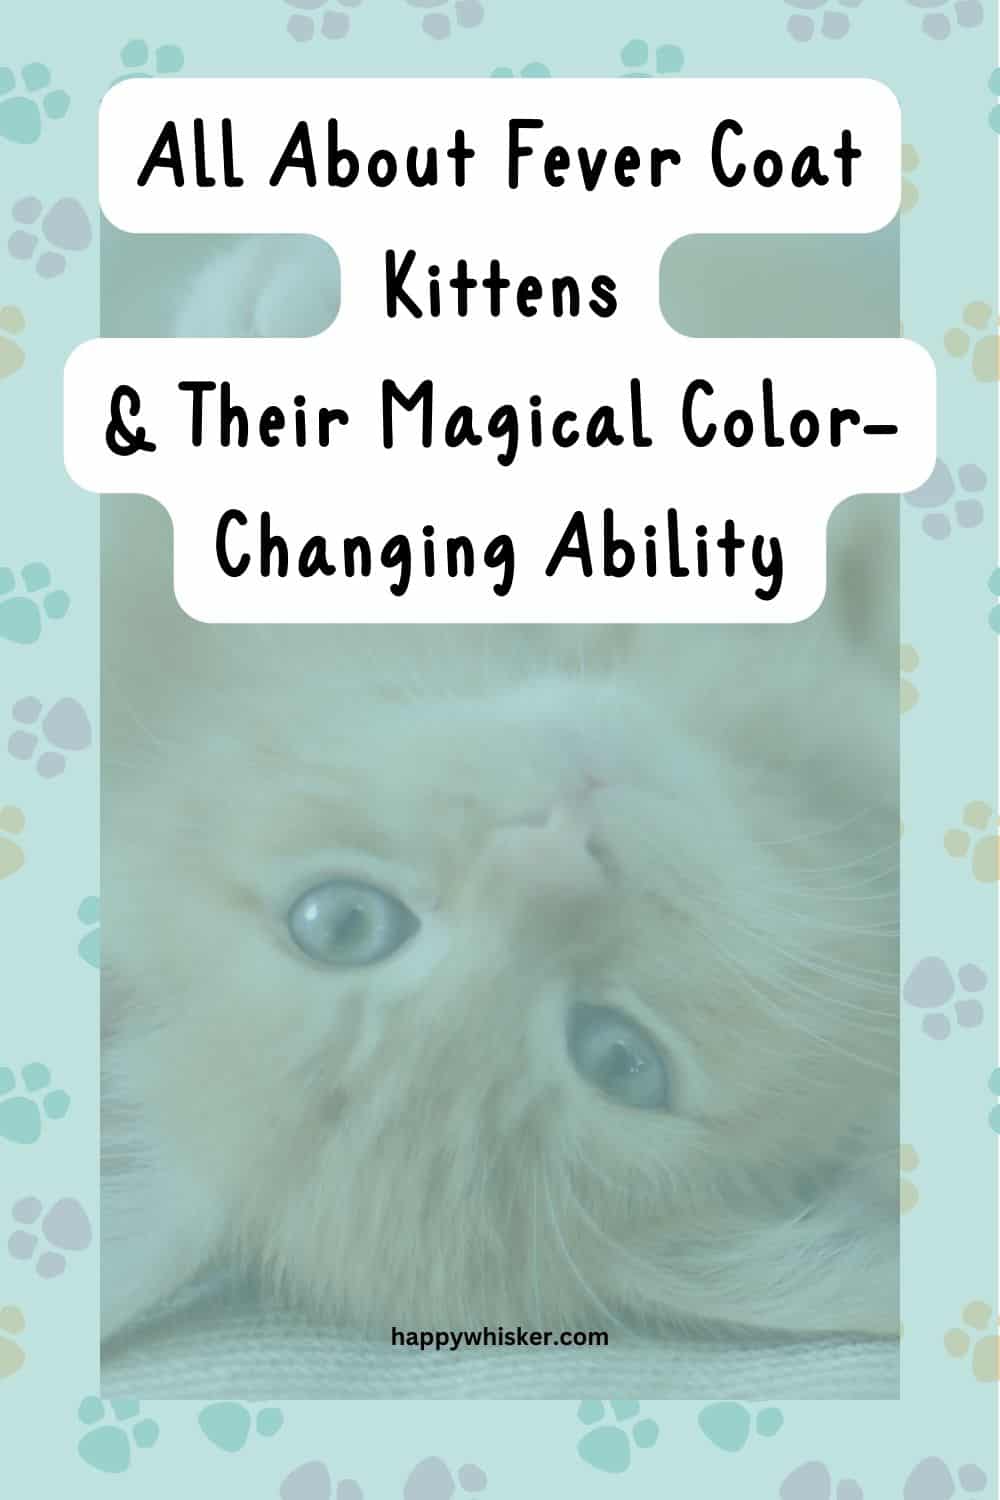 All About Fever Coat Kittens And Their Magical Color-Changing Ability Pinterest